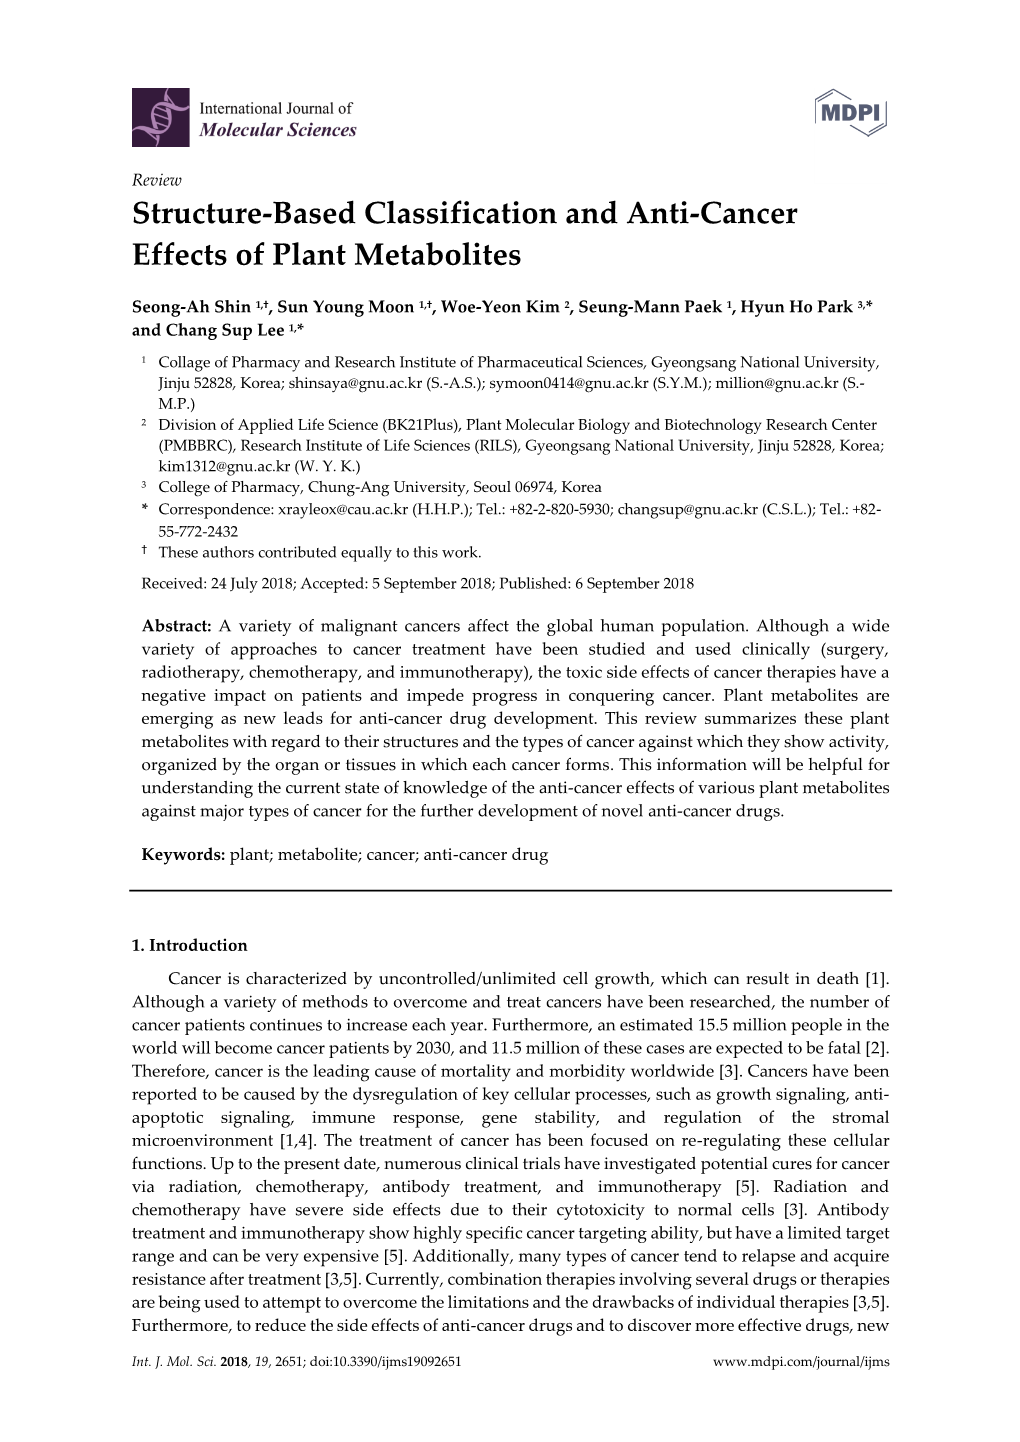 Structure-Based Classification and Anti-Cancer Effects of Plant Metabolites